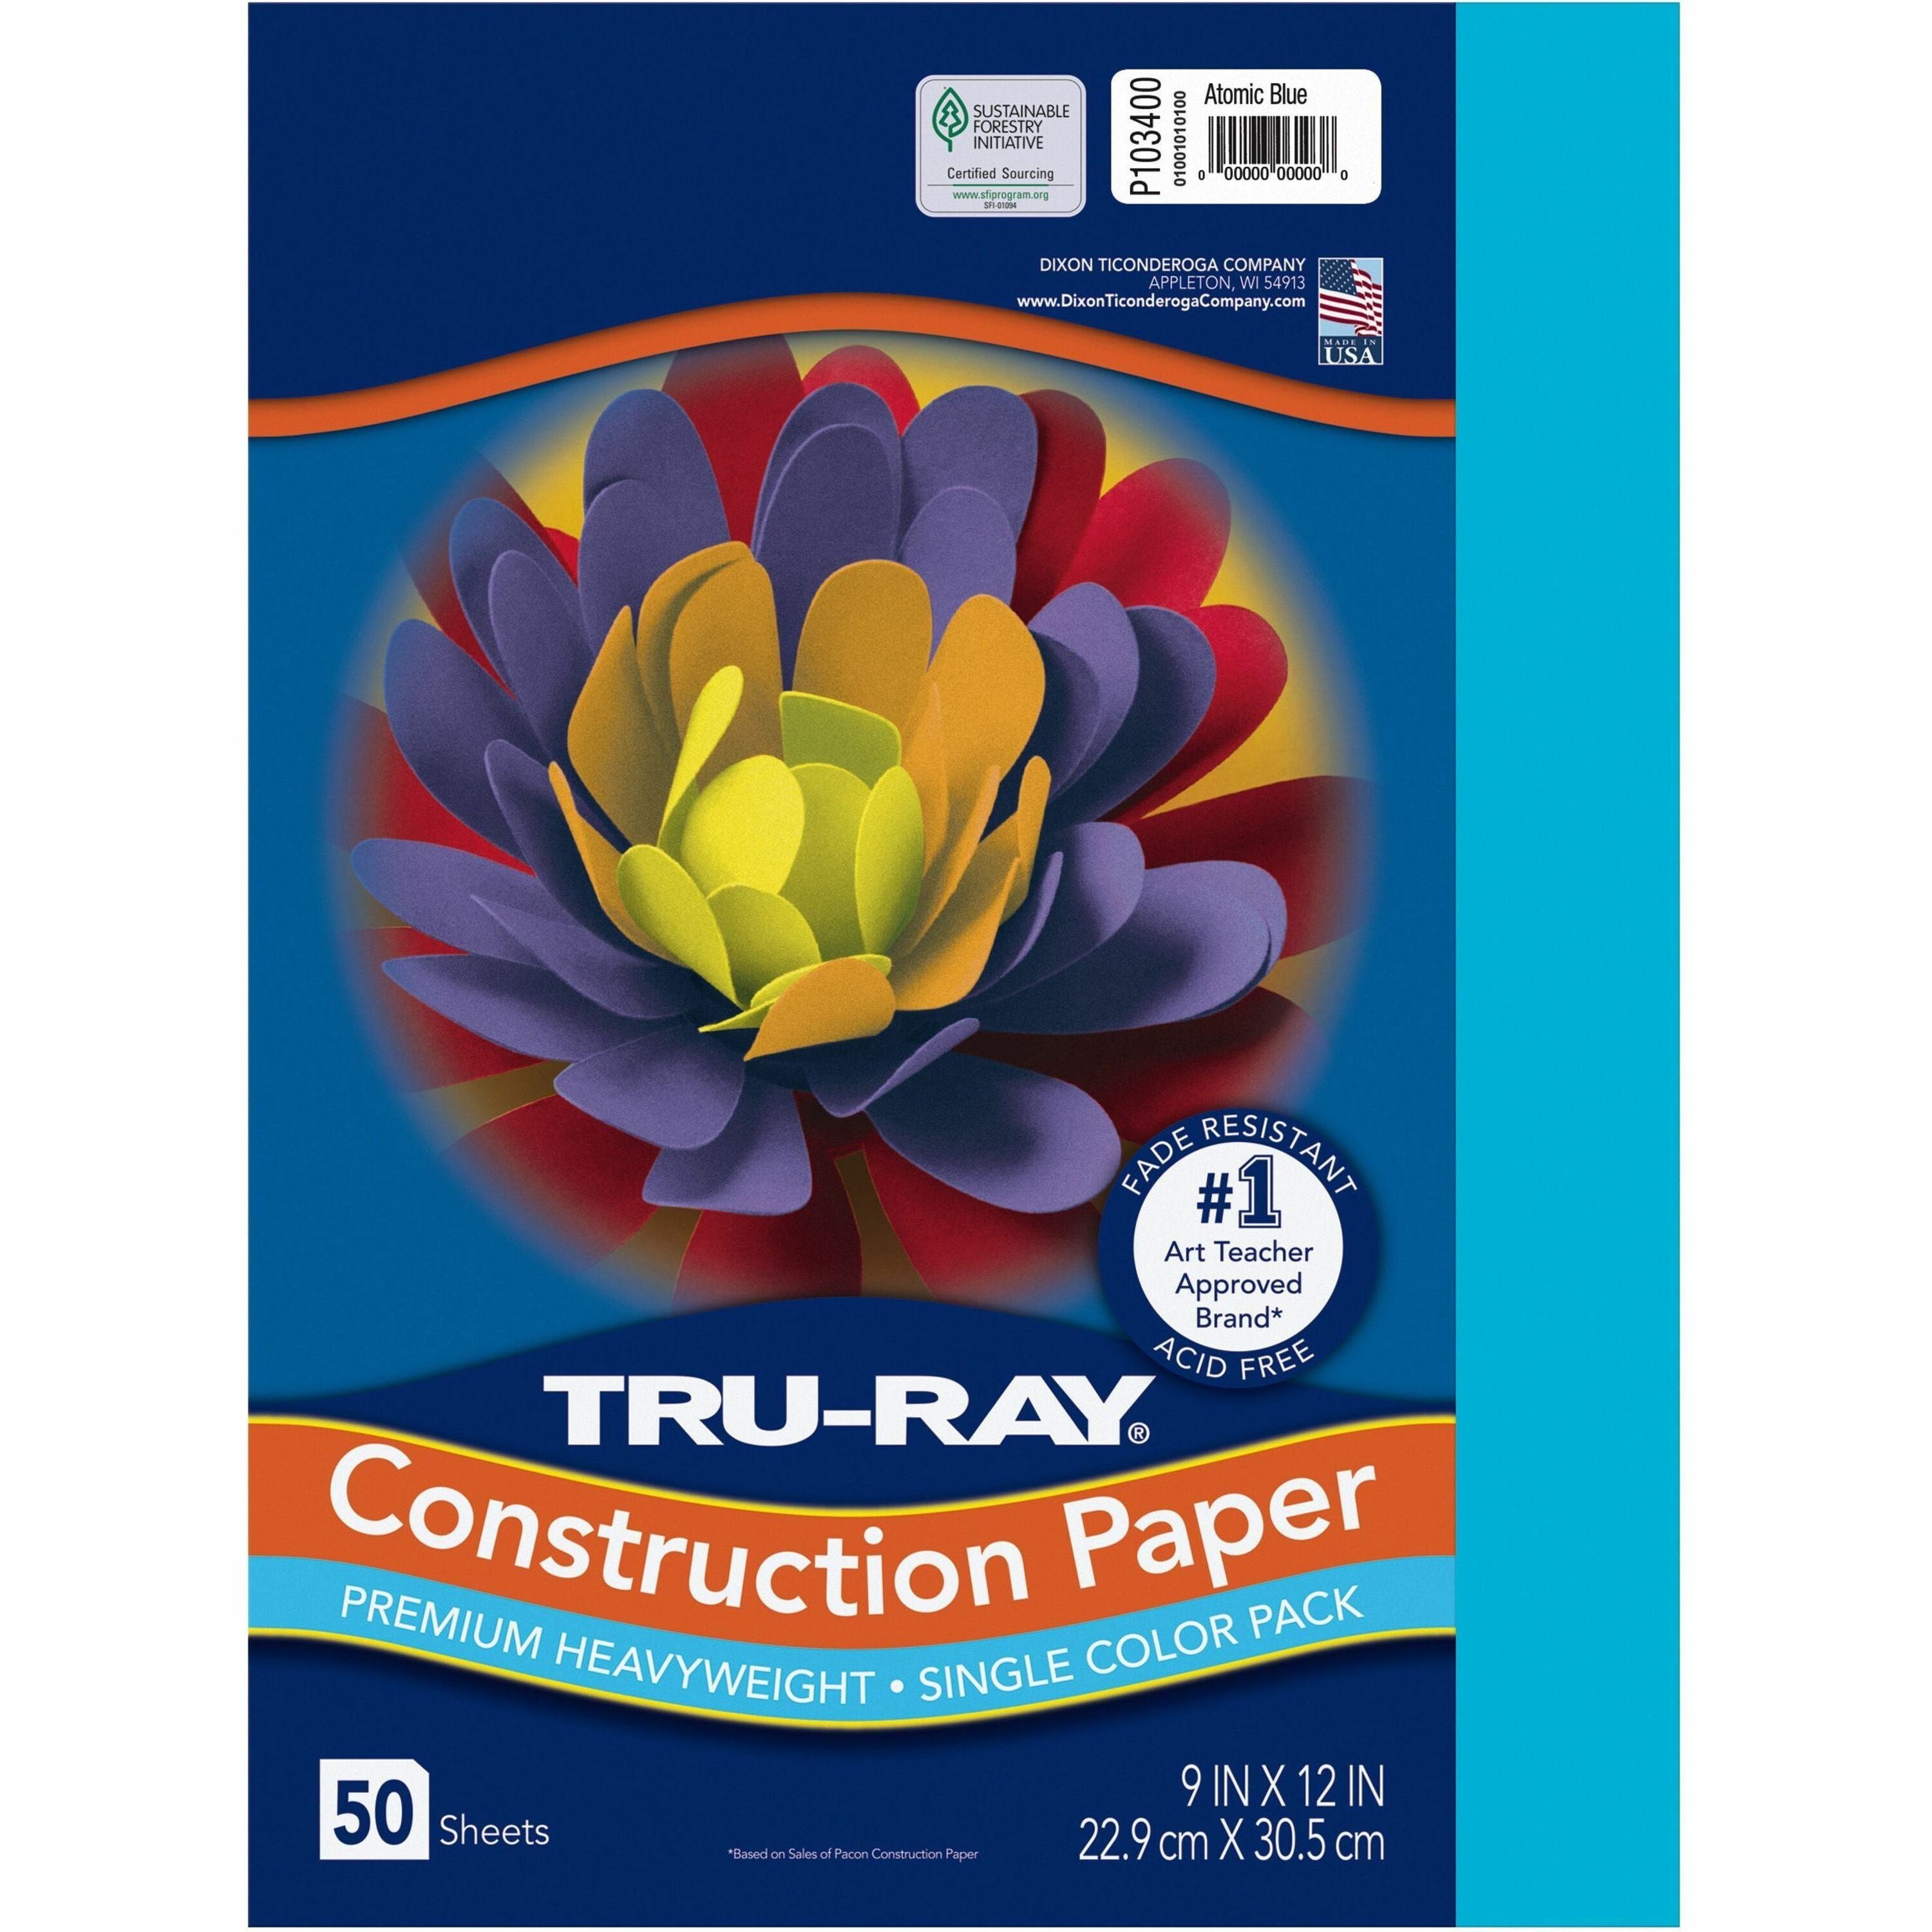 tru-ray-construction-paper-art-project-12width-x-9length-50-pack-atomic-blue-sulphite_pac103400 - 1